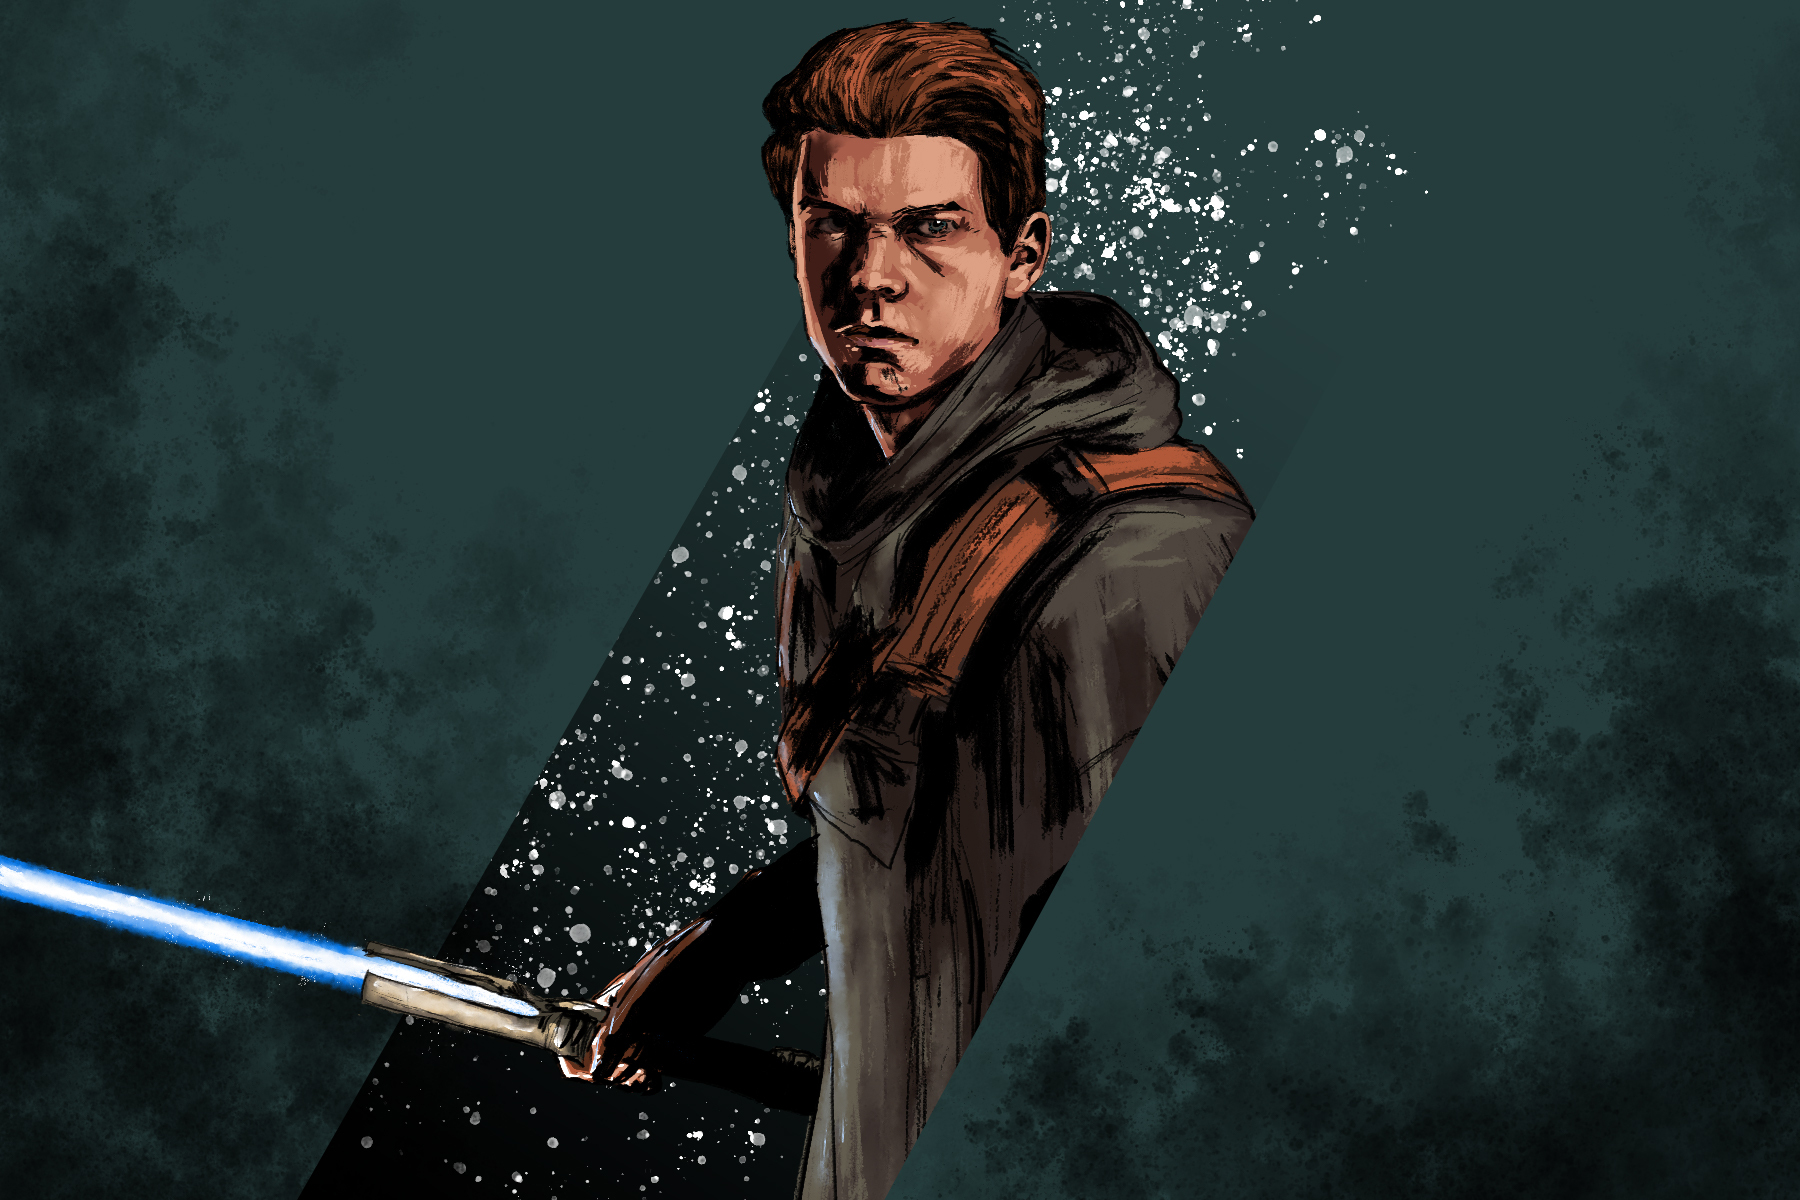 Cal Kestis Could Become One of the Greatest Jedi In 'Star Wars' History